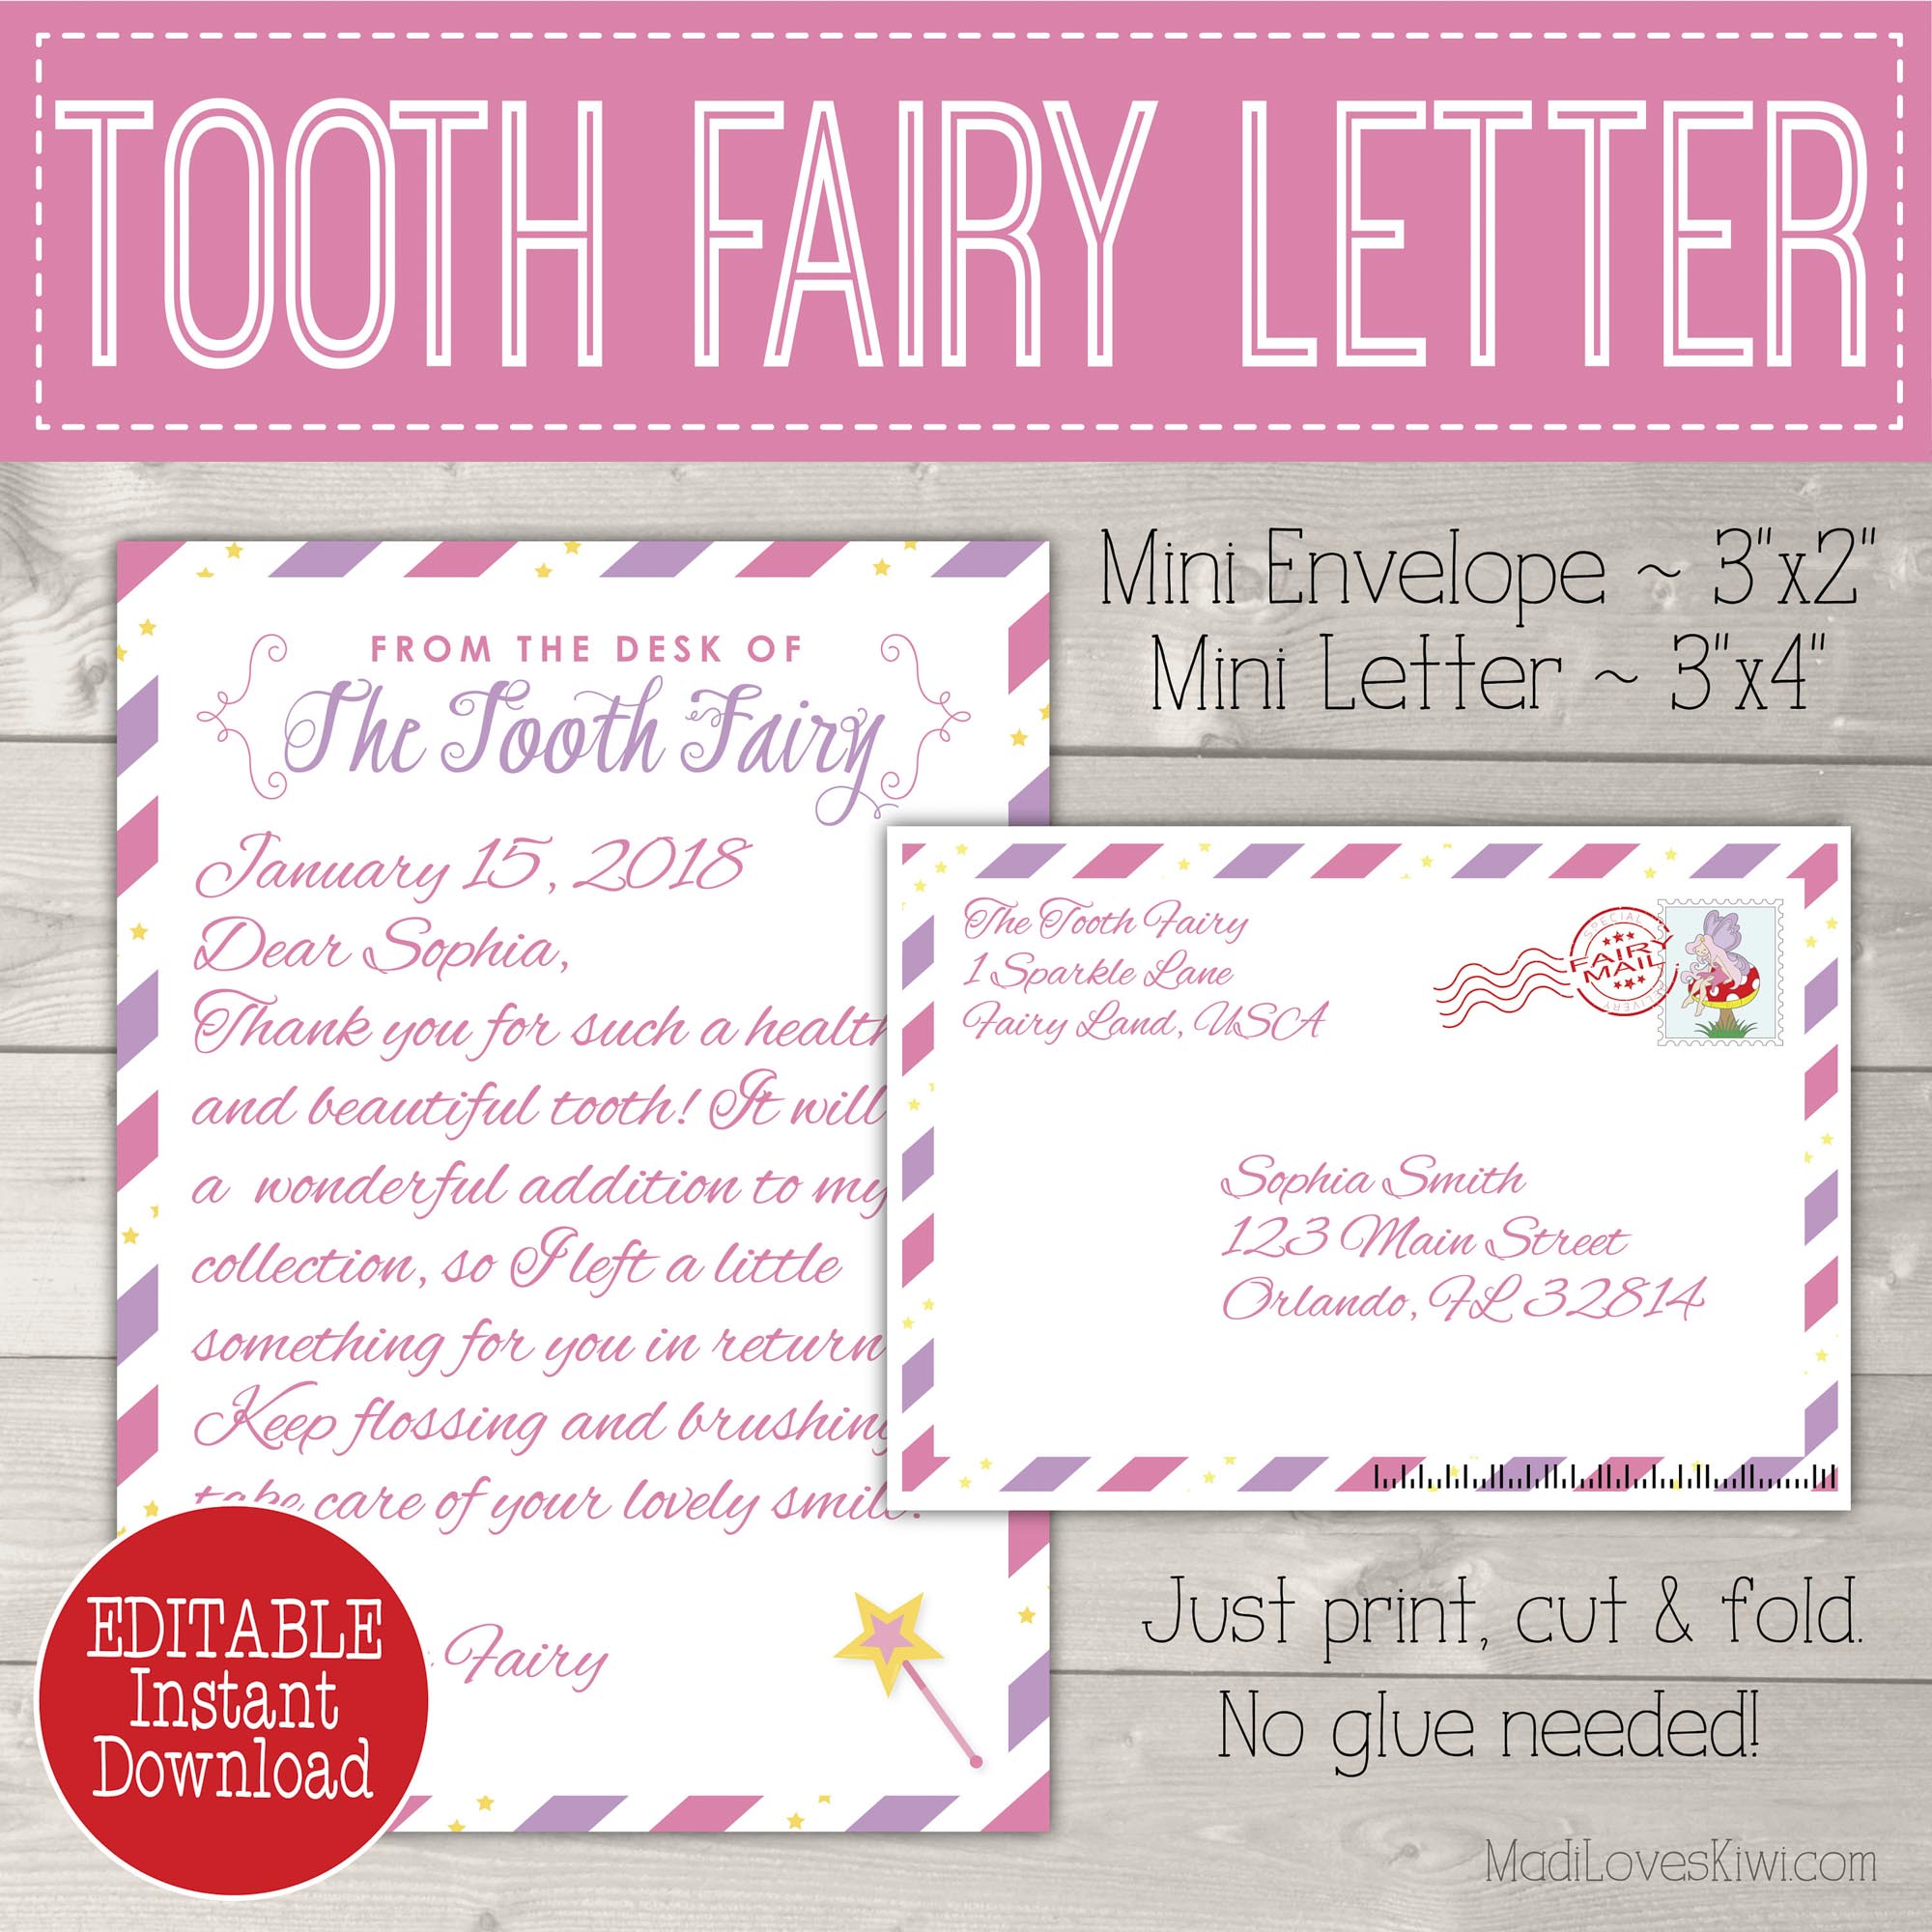 Tooth Fairy Letter Template Free Infoupdate org